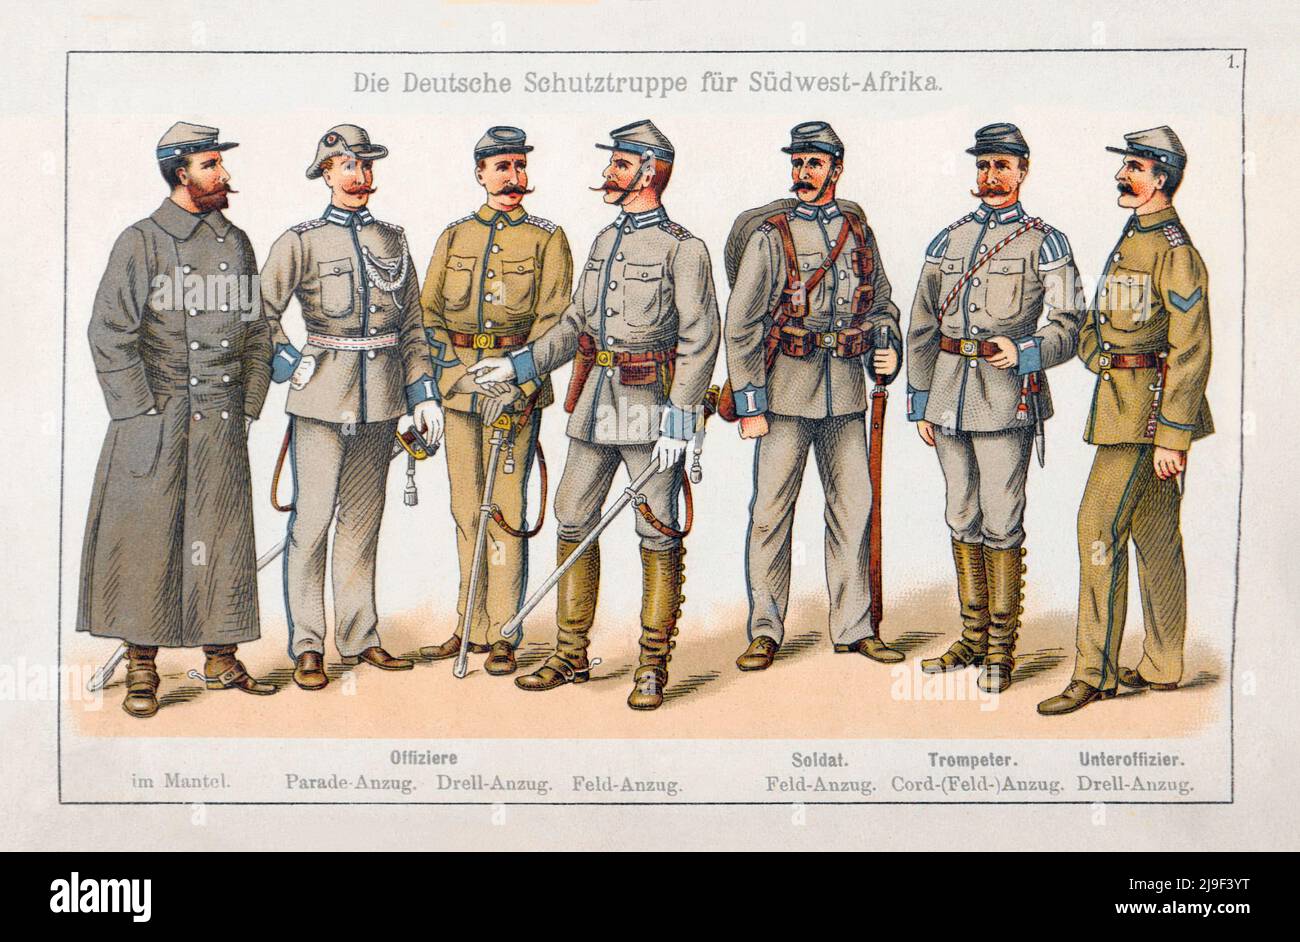 19th century vintage illustration of the Imperial Schutztruppe for German South West Africa. 1894 German officers in a greatcoat, parade dress uniform Stock Photo